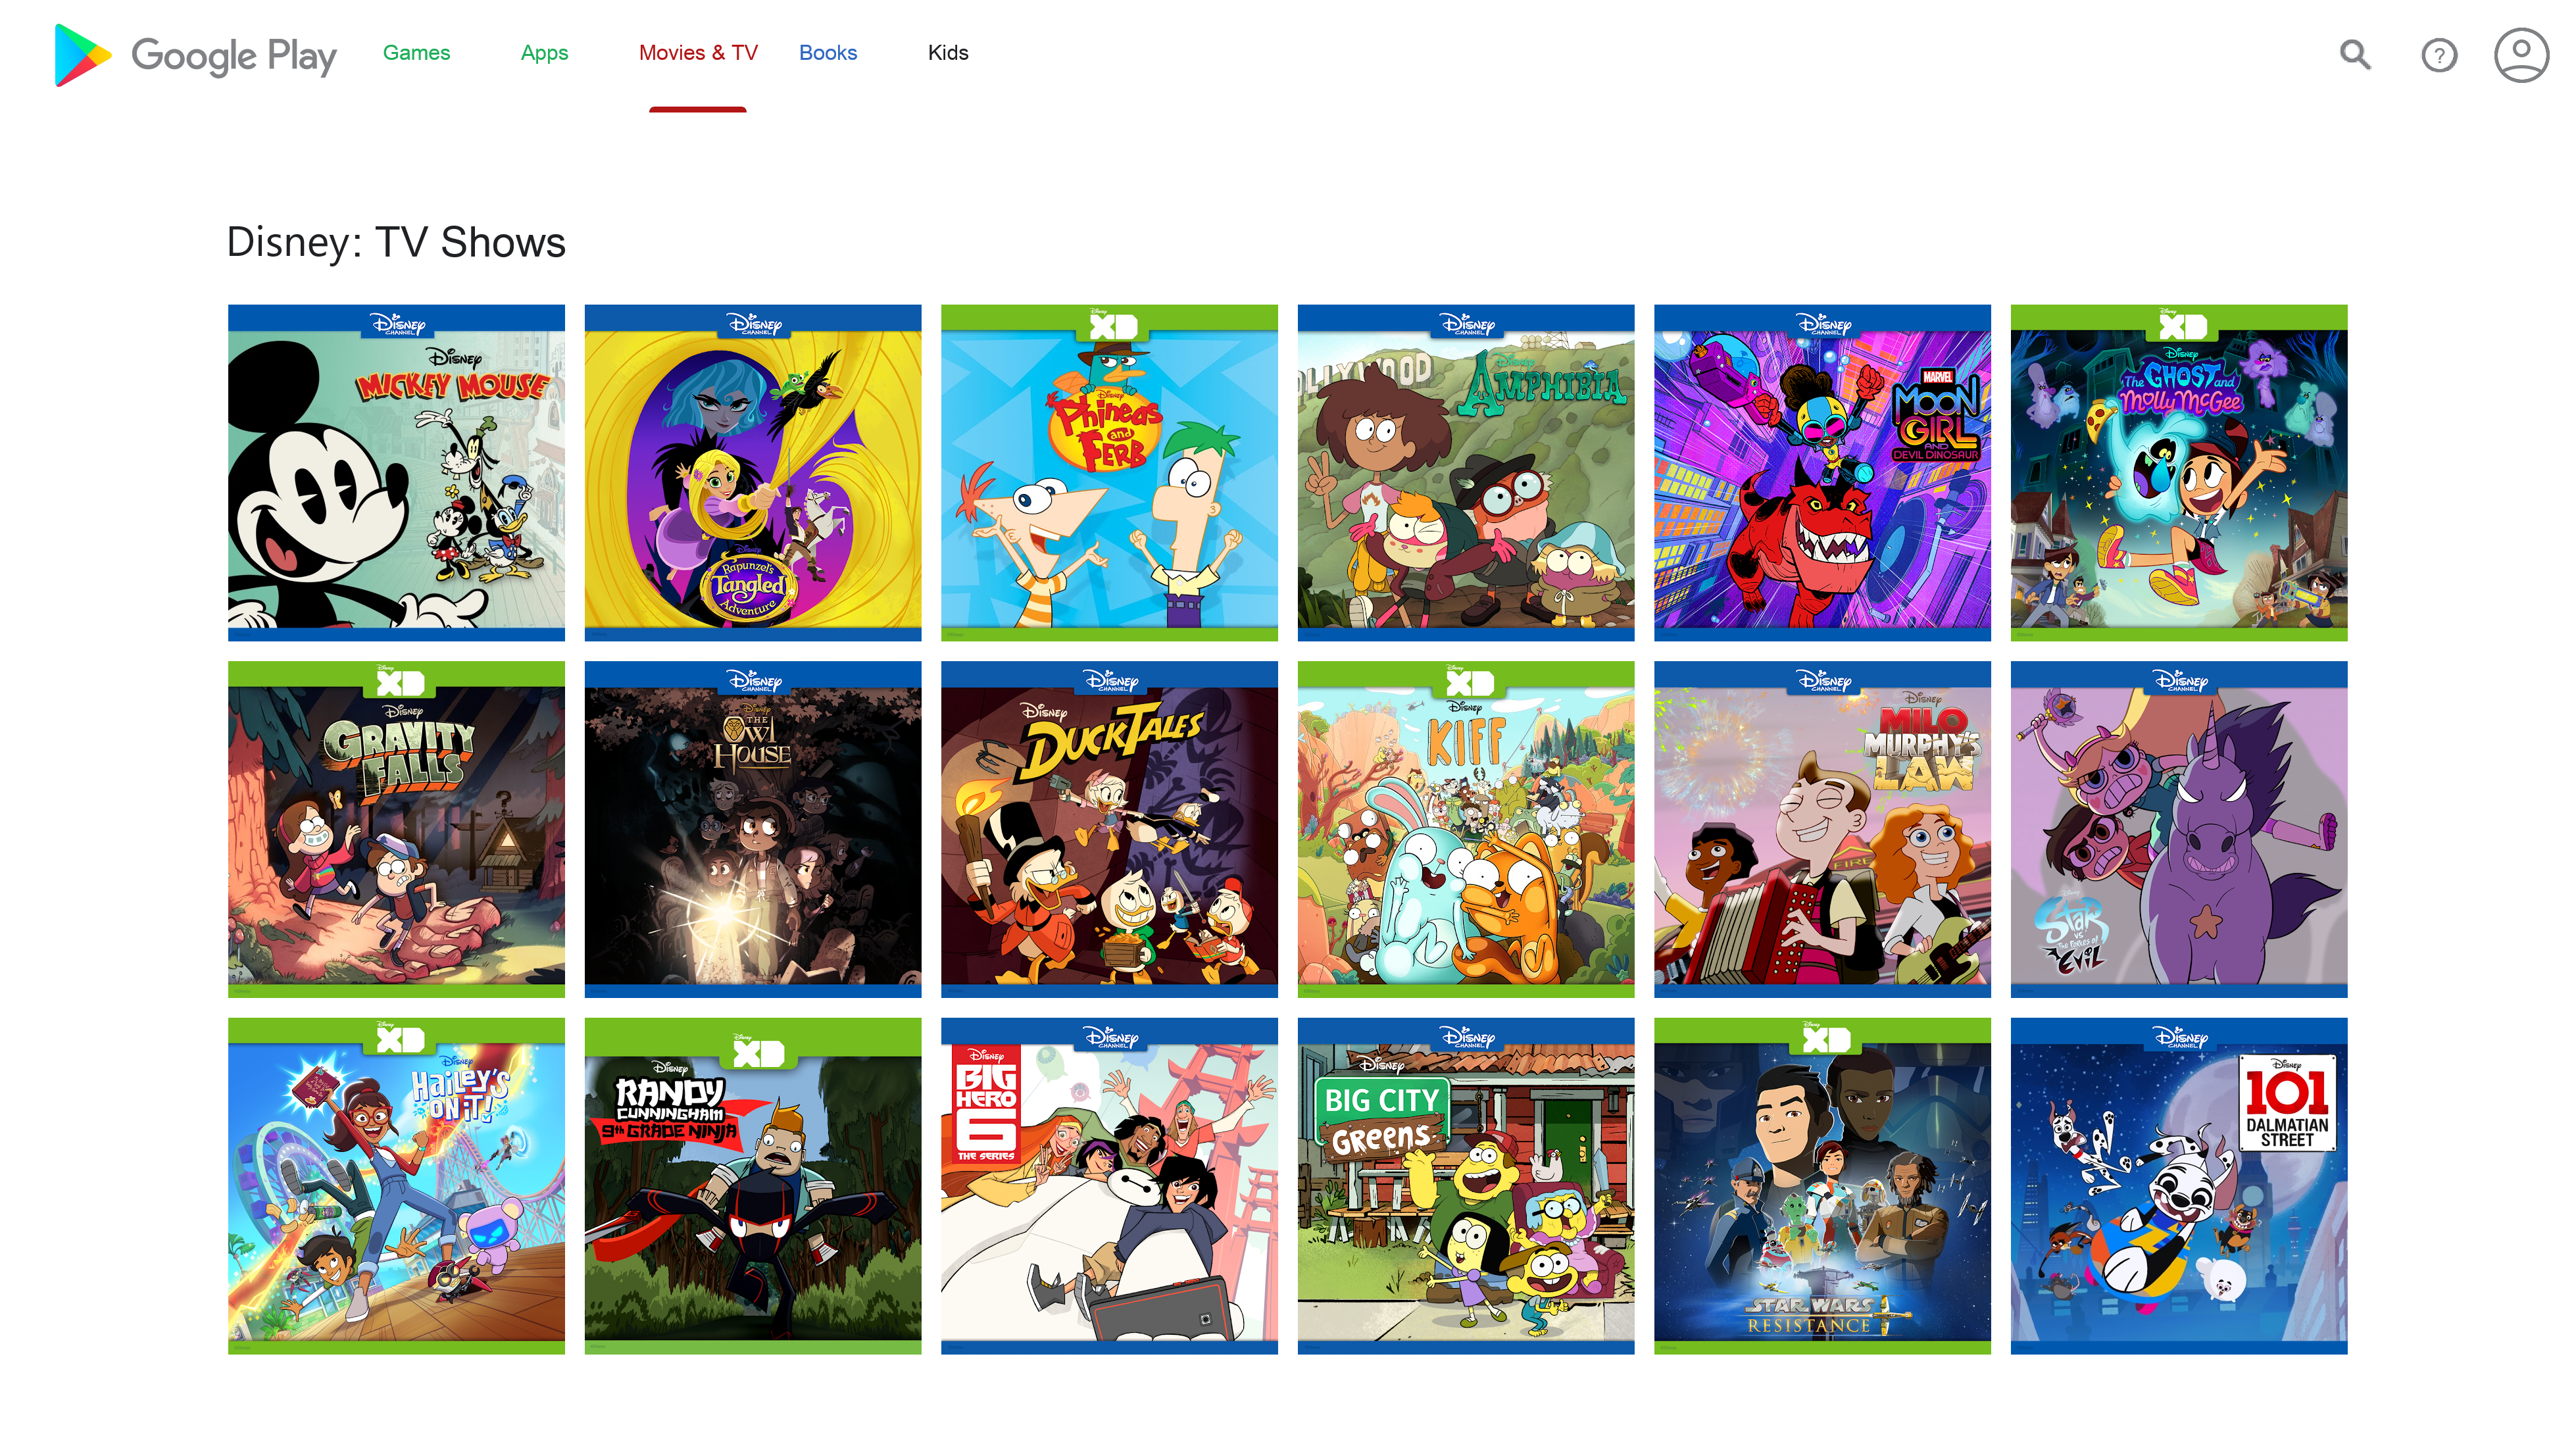 Disney: TV Shows Available of Google Play by Tagirovo on DeviantArt